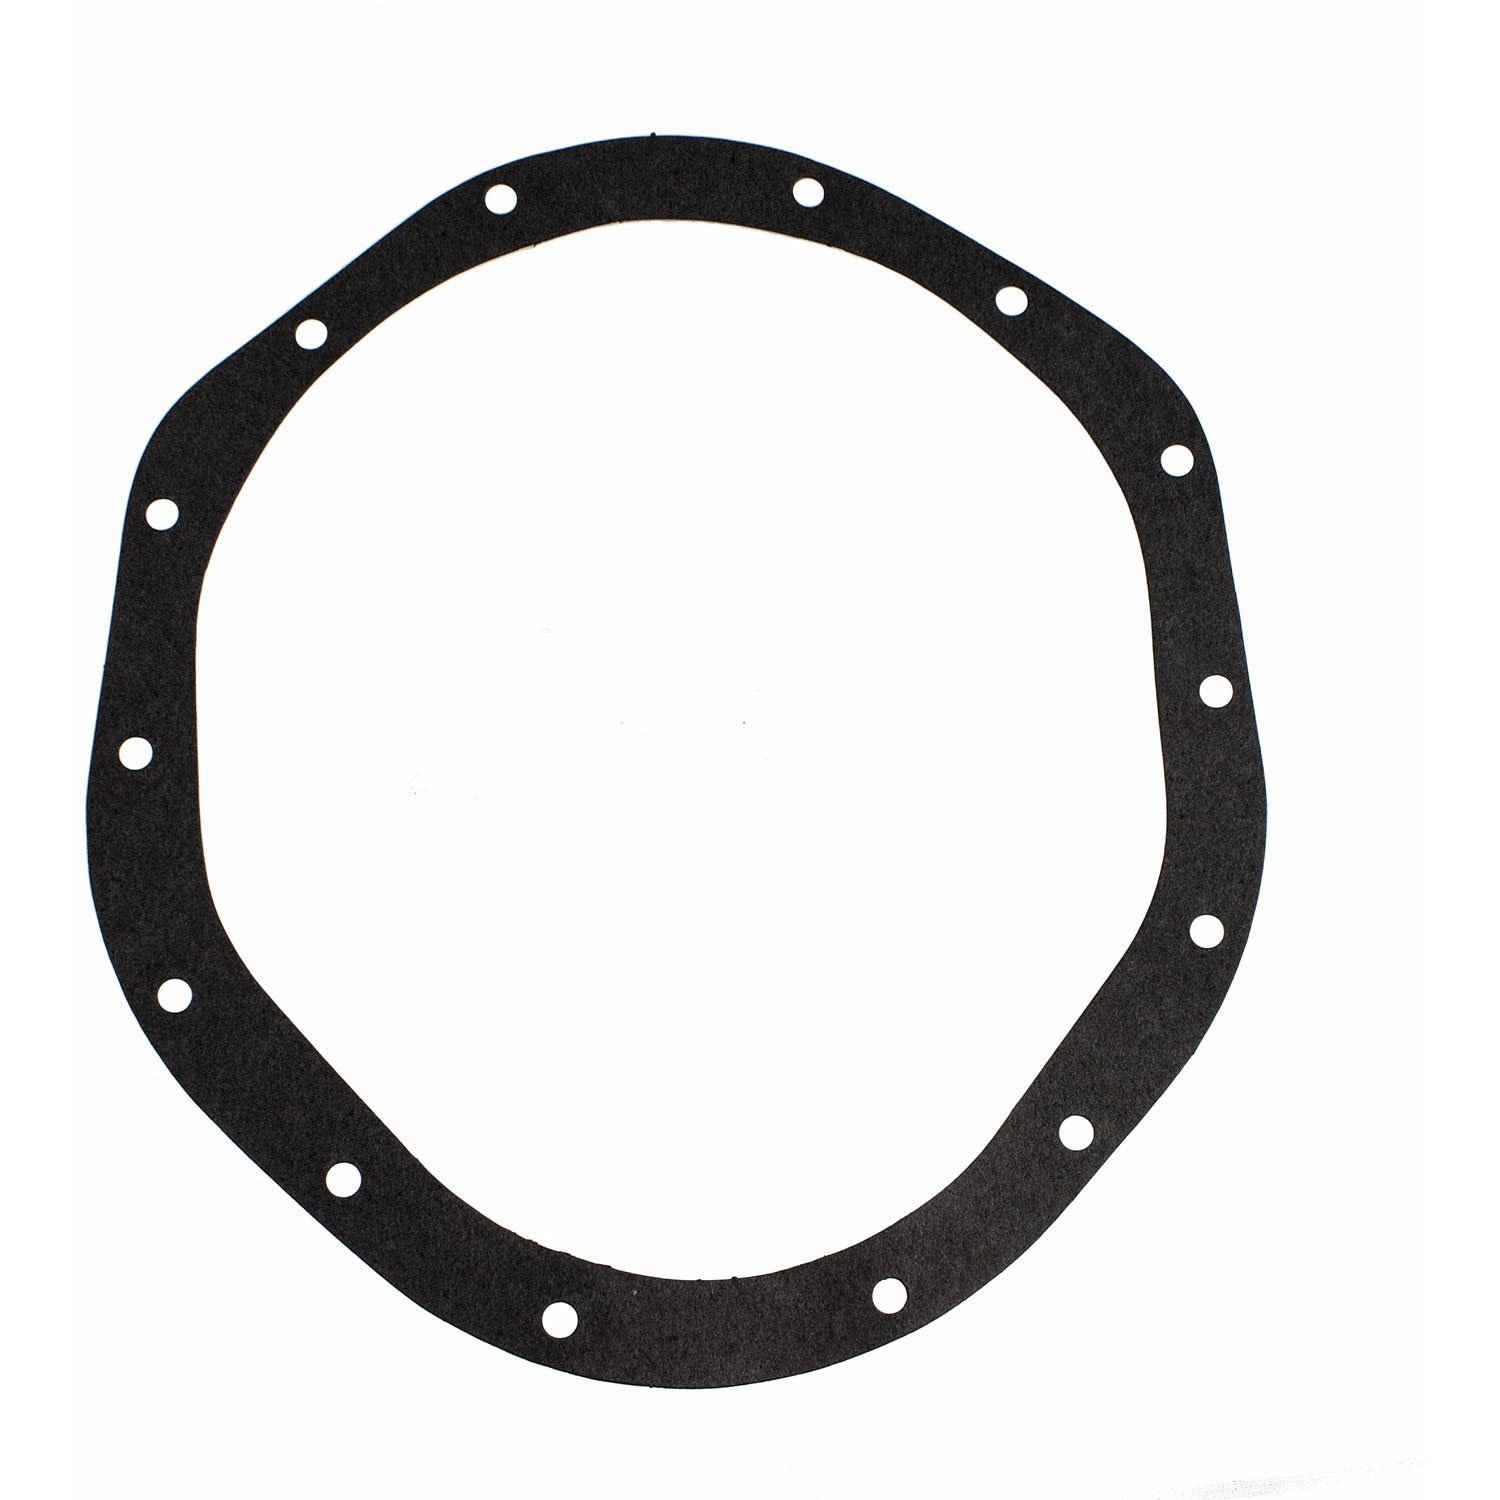 Differential Cover Gasket Chrysler 9.25" IFS Front 14-Bolt